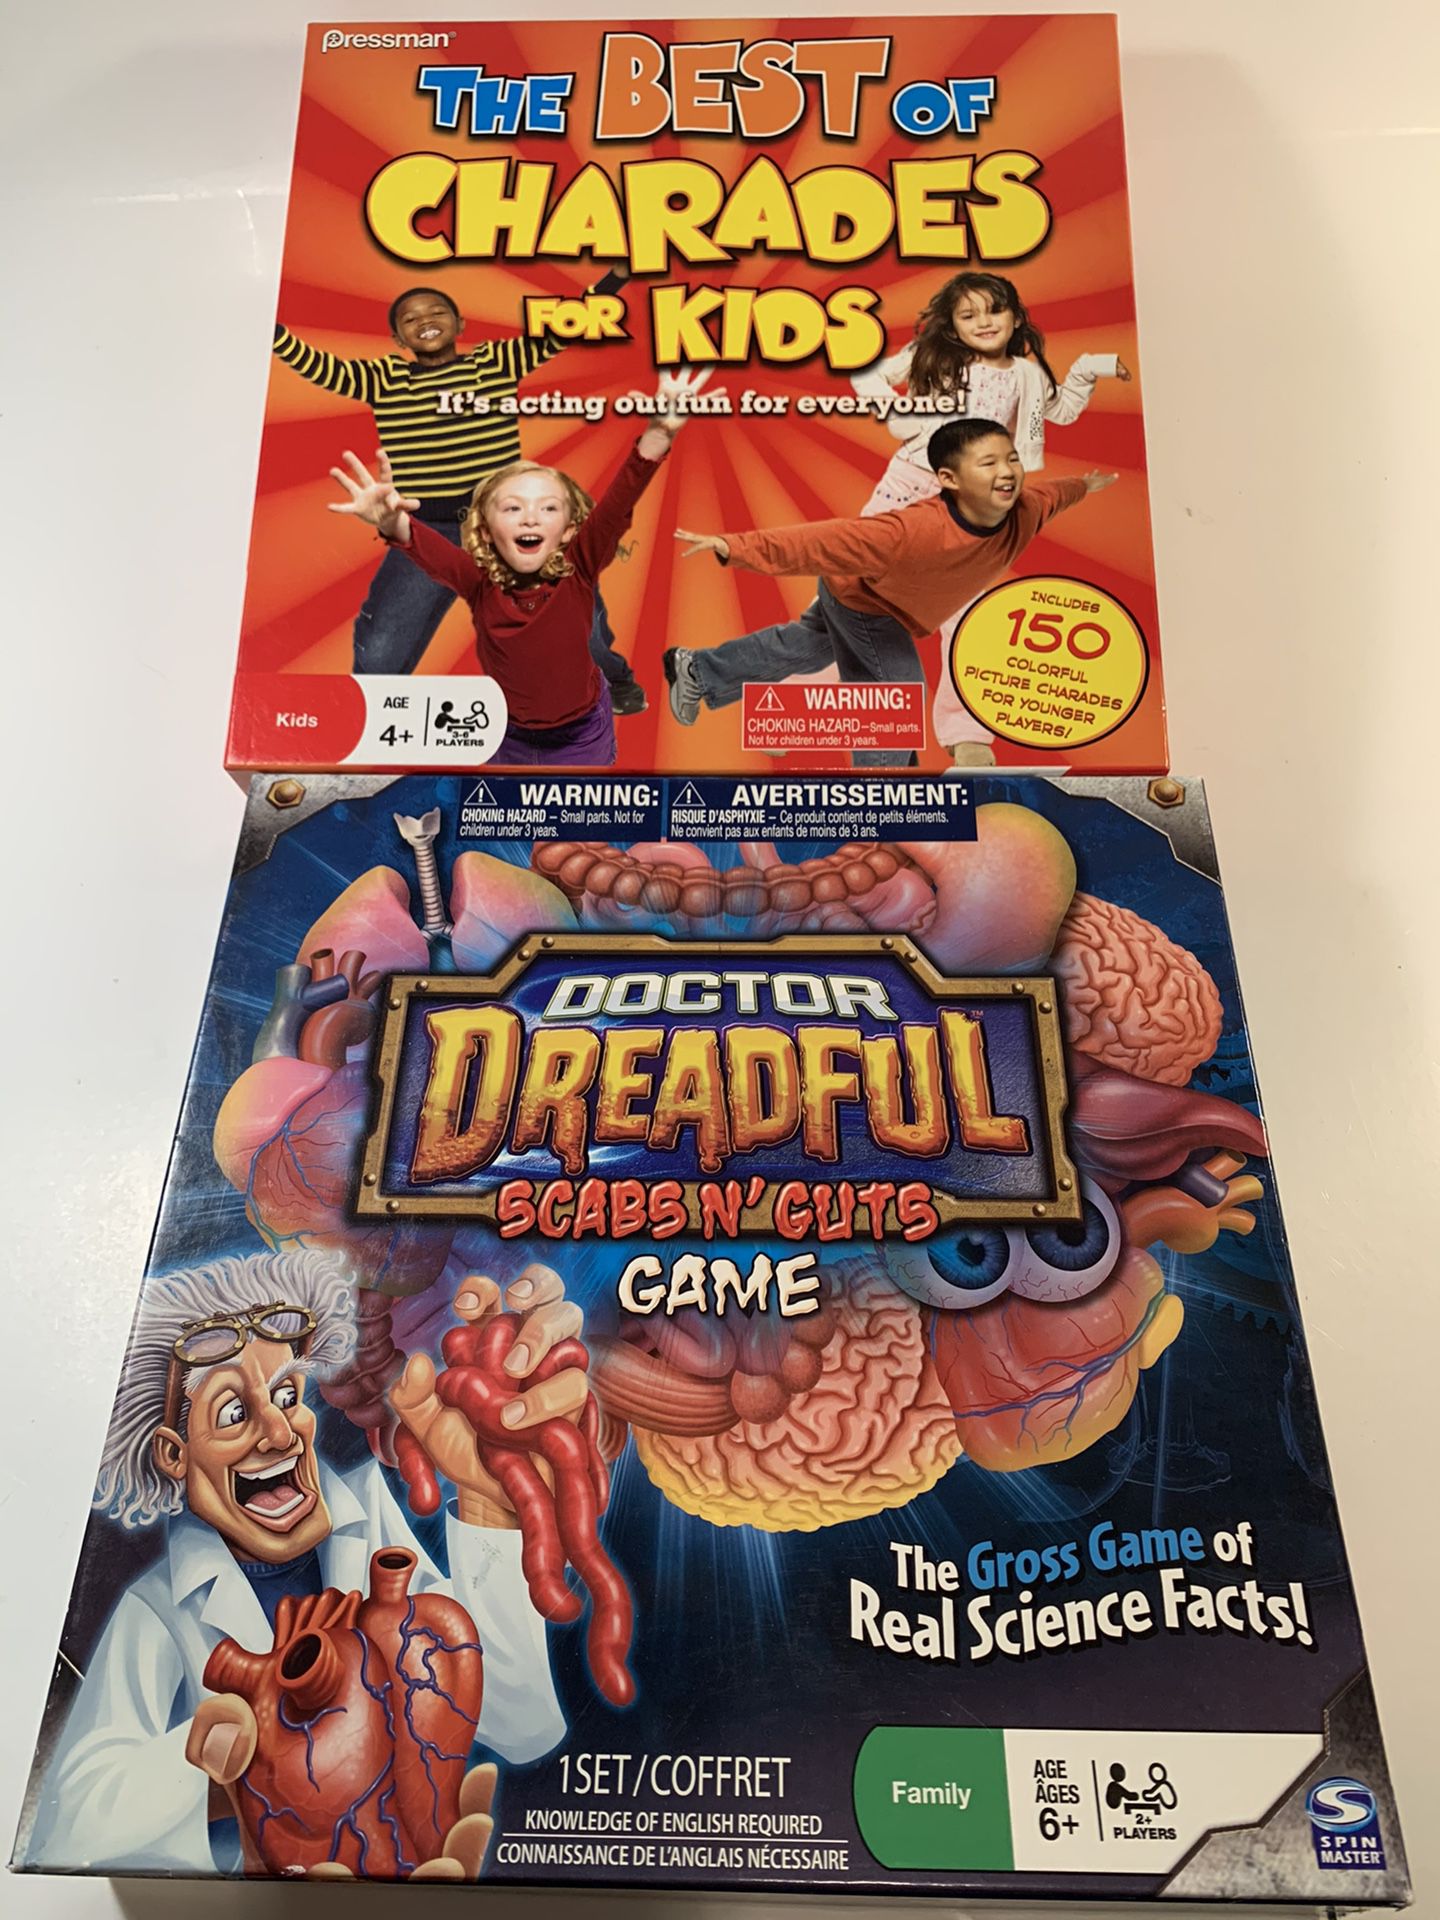 Kids Charades & Doctor Dreadful Science Game